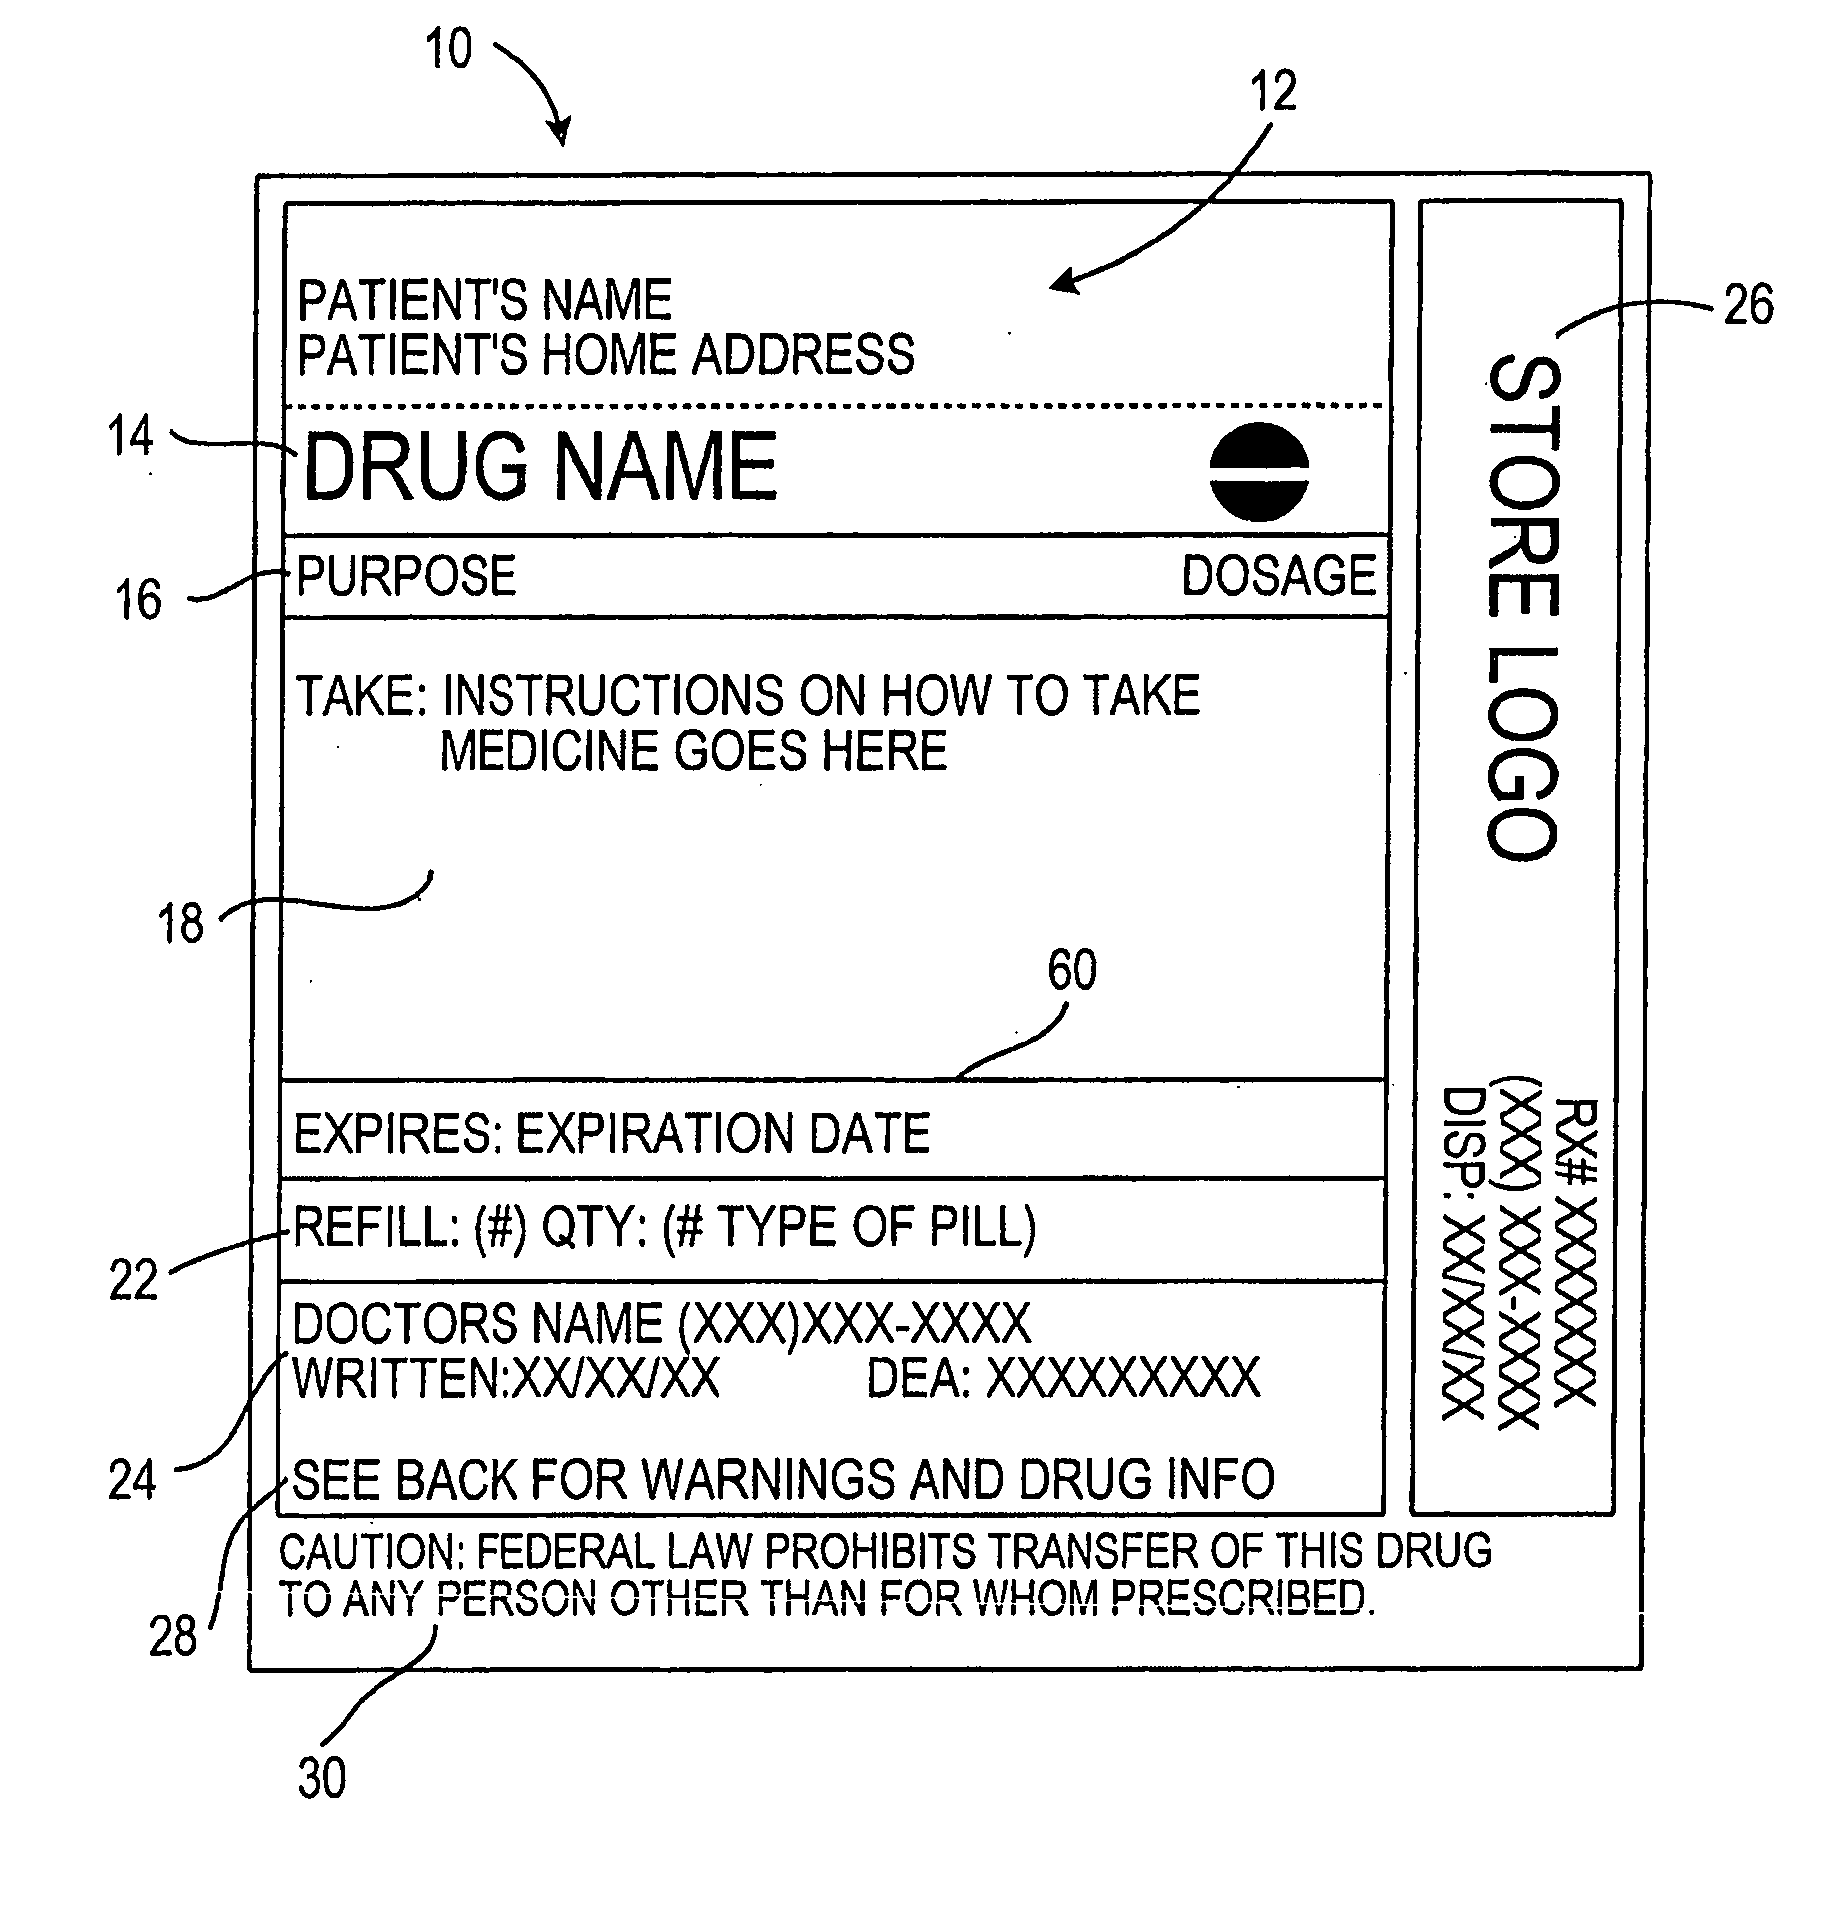 Medication packaging and labeling system